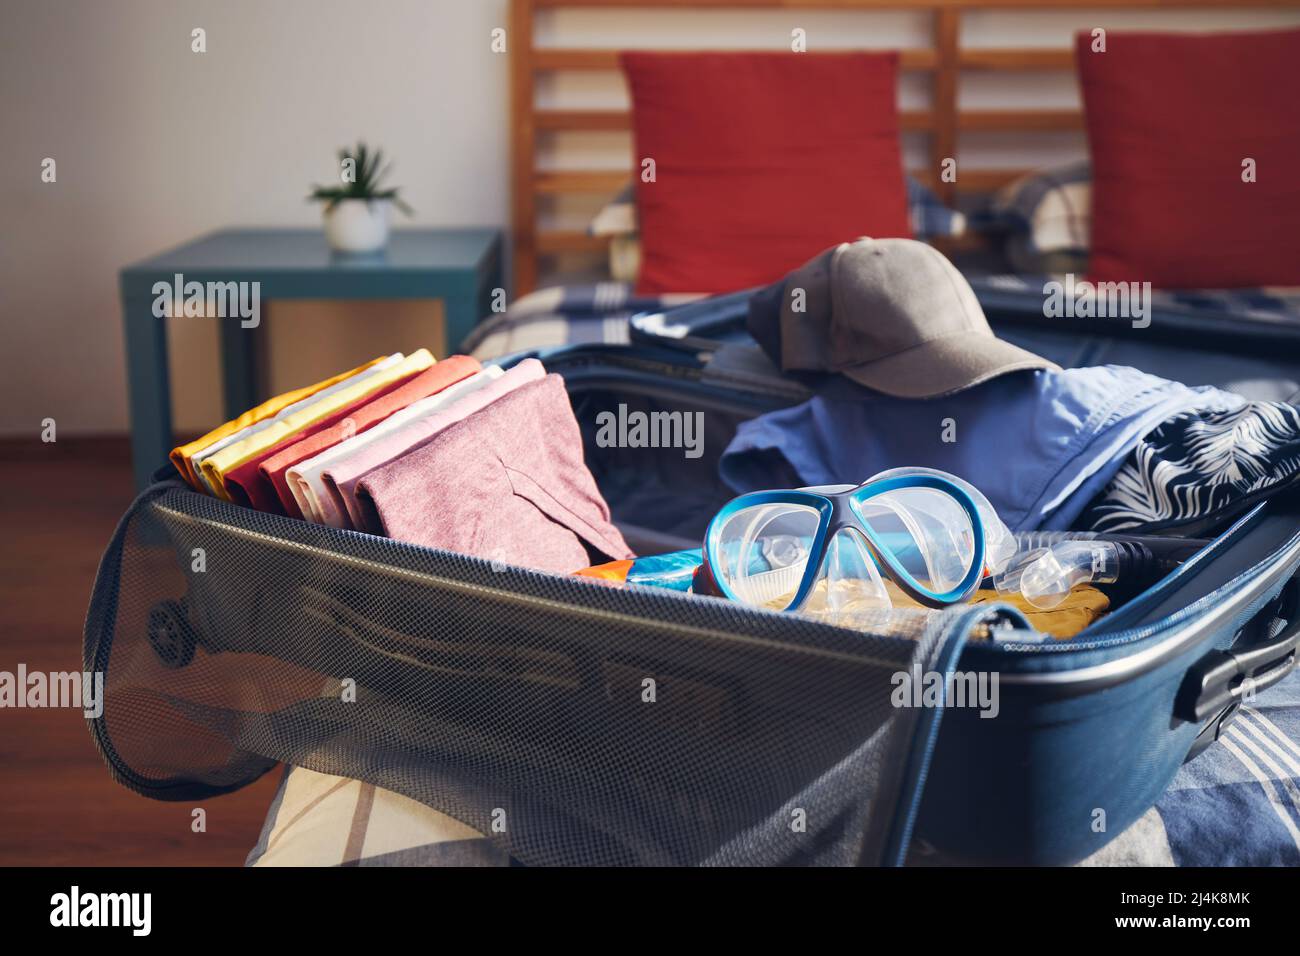 Cropped View Of Man Packing Clothes Into Travel Bag Stock Photo, Picture  and Royalty Free Image. Image 114774181.